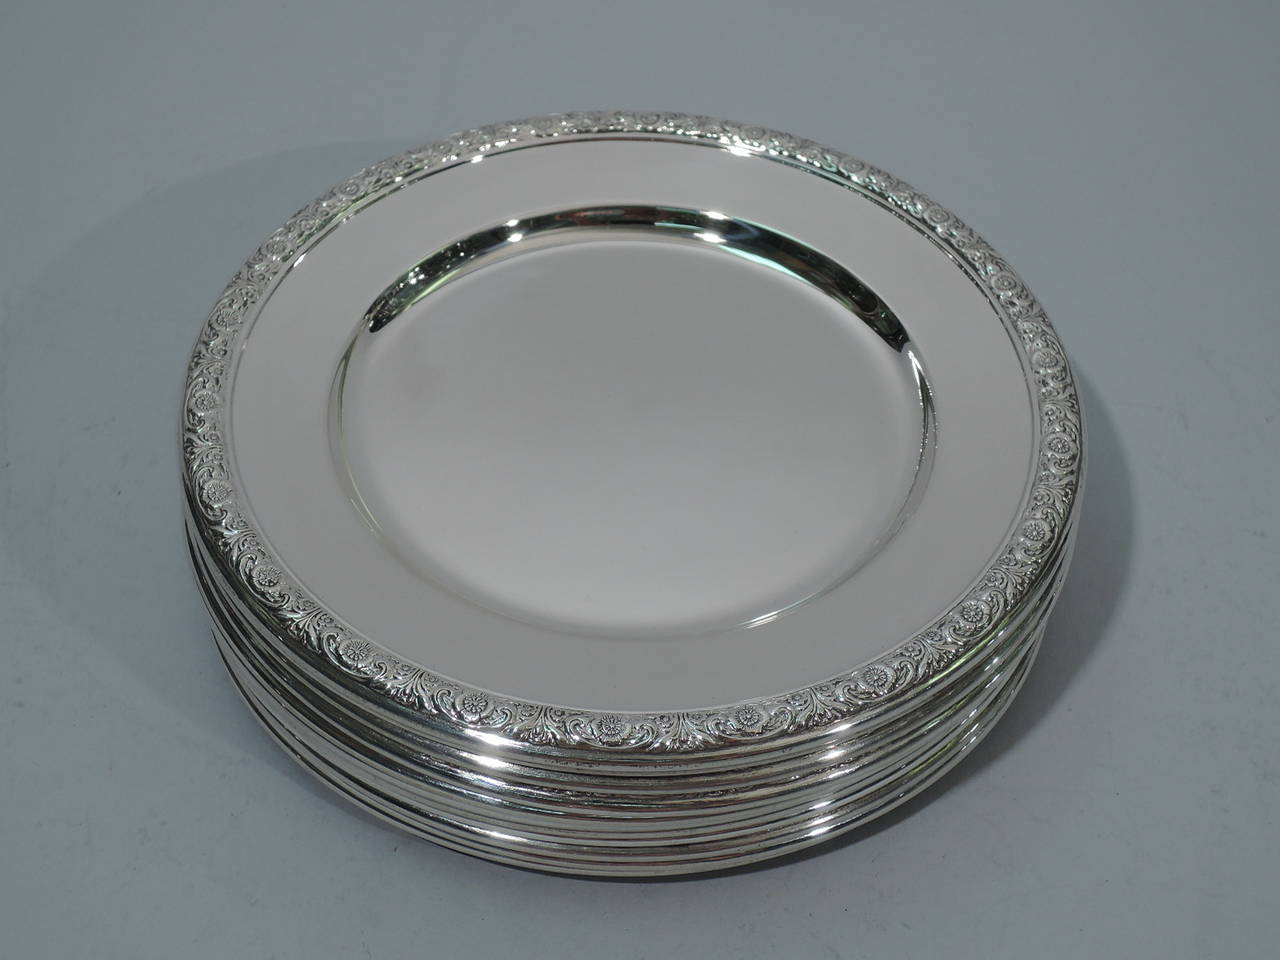 Set of 12 sterling silver bread-and-butter plates in Prelude pattern. Made by International in Meriden, Conn. Each: plain well. Rim has chased flowers and scrolls. Hallmark includes no. H576. Excellent condition.

Dimensions: H ¼ x D 6 in. Total